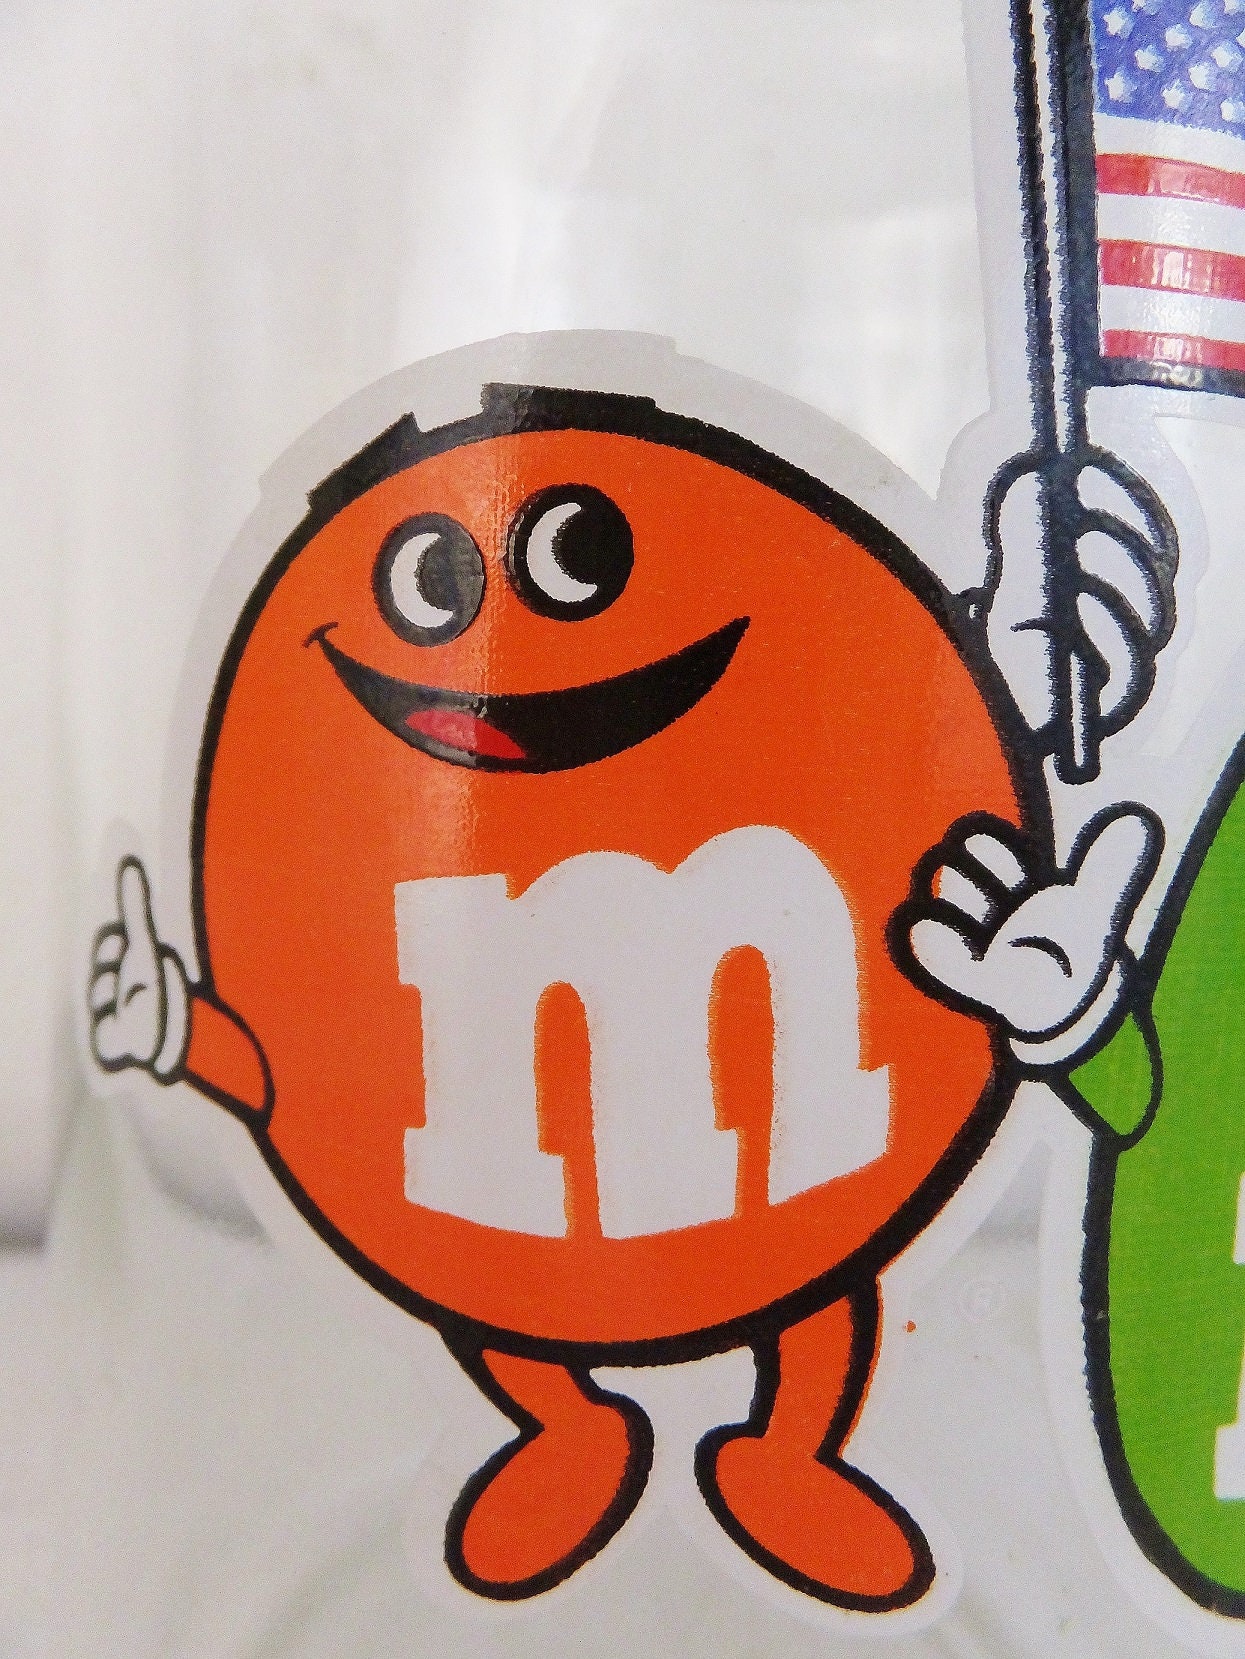 The 1919 Candy Company M&Ms® Plain in Sm Glass Jar